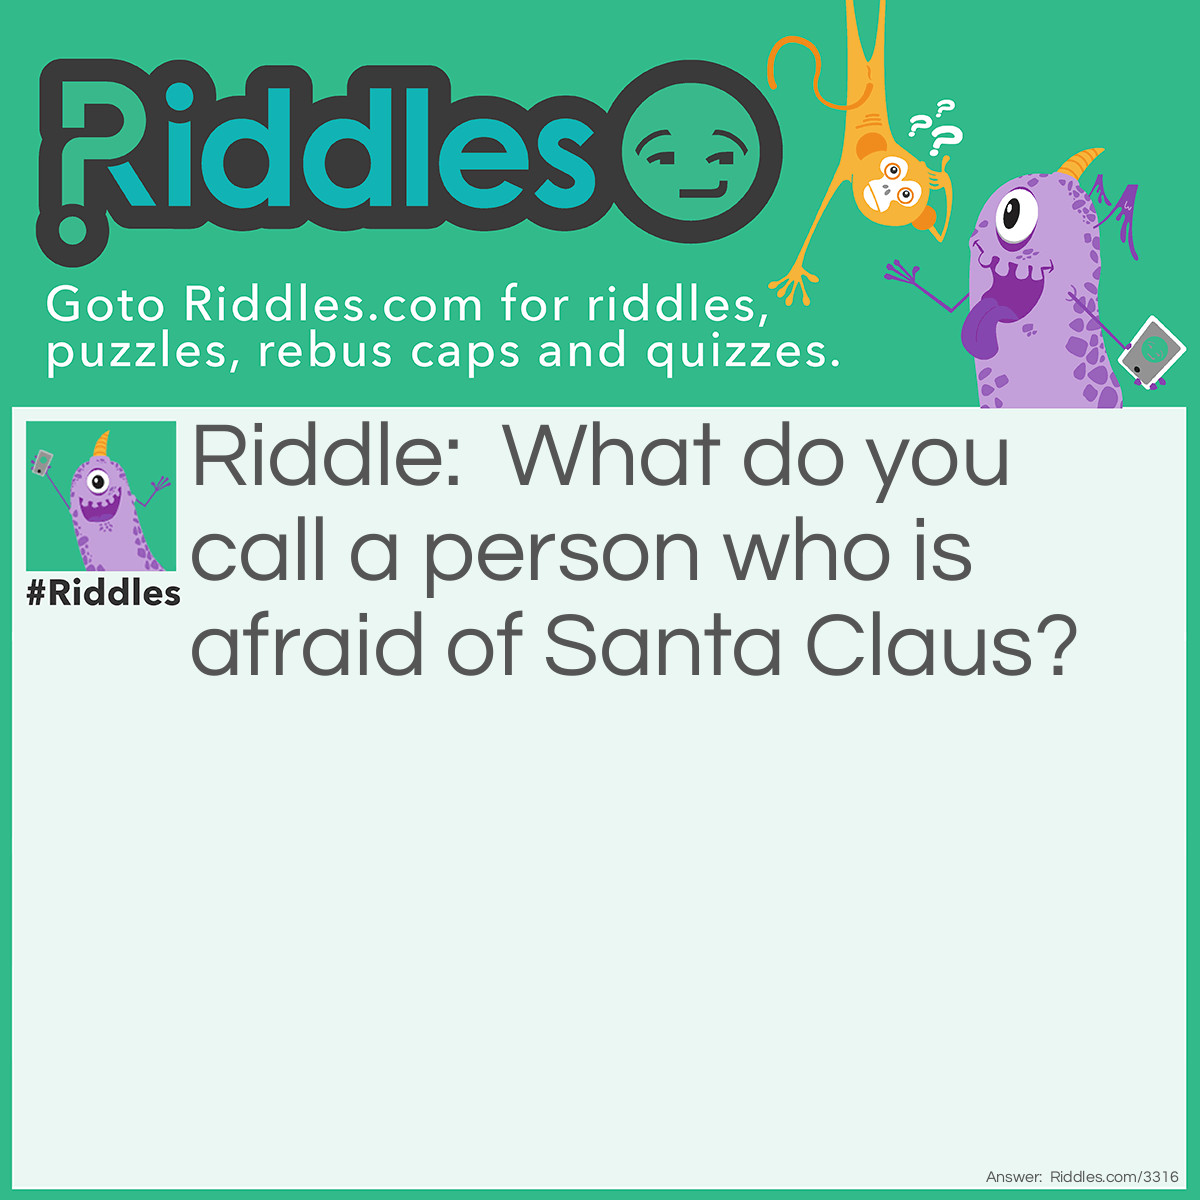 Riddle: What do you call a person who is afraid of Santa Claus? Answer: Claus-traophobic.